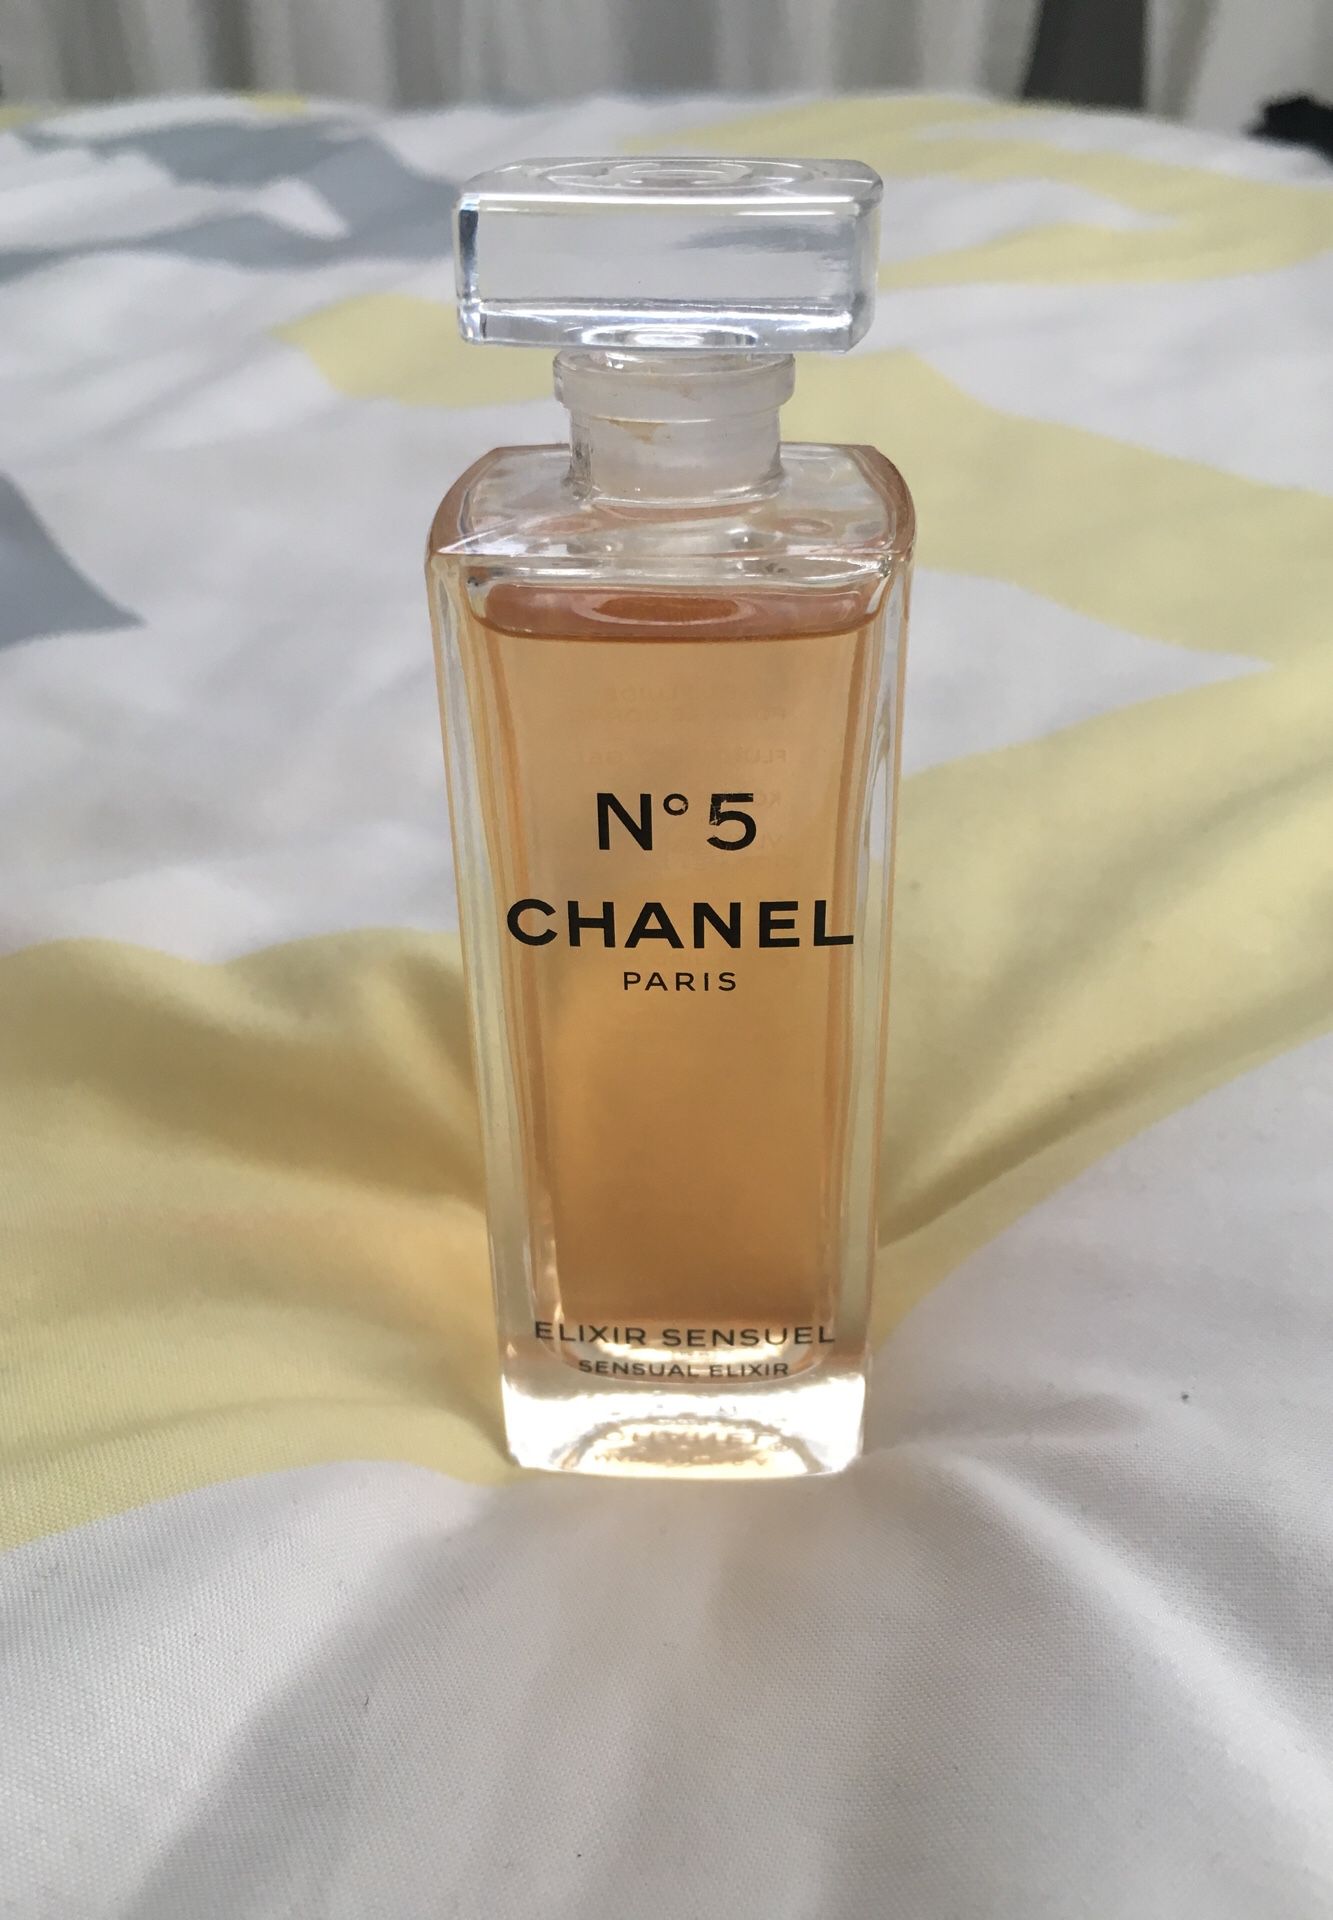 Chanel No. 5 - Perfume Writing Pens for Sale in Glendale, AZ - OfferUp